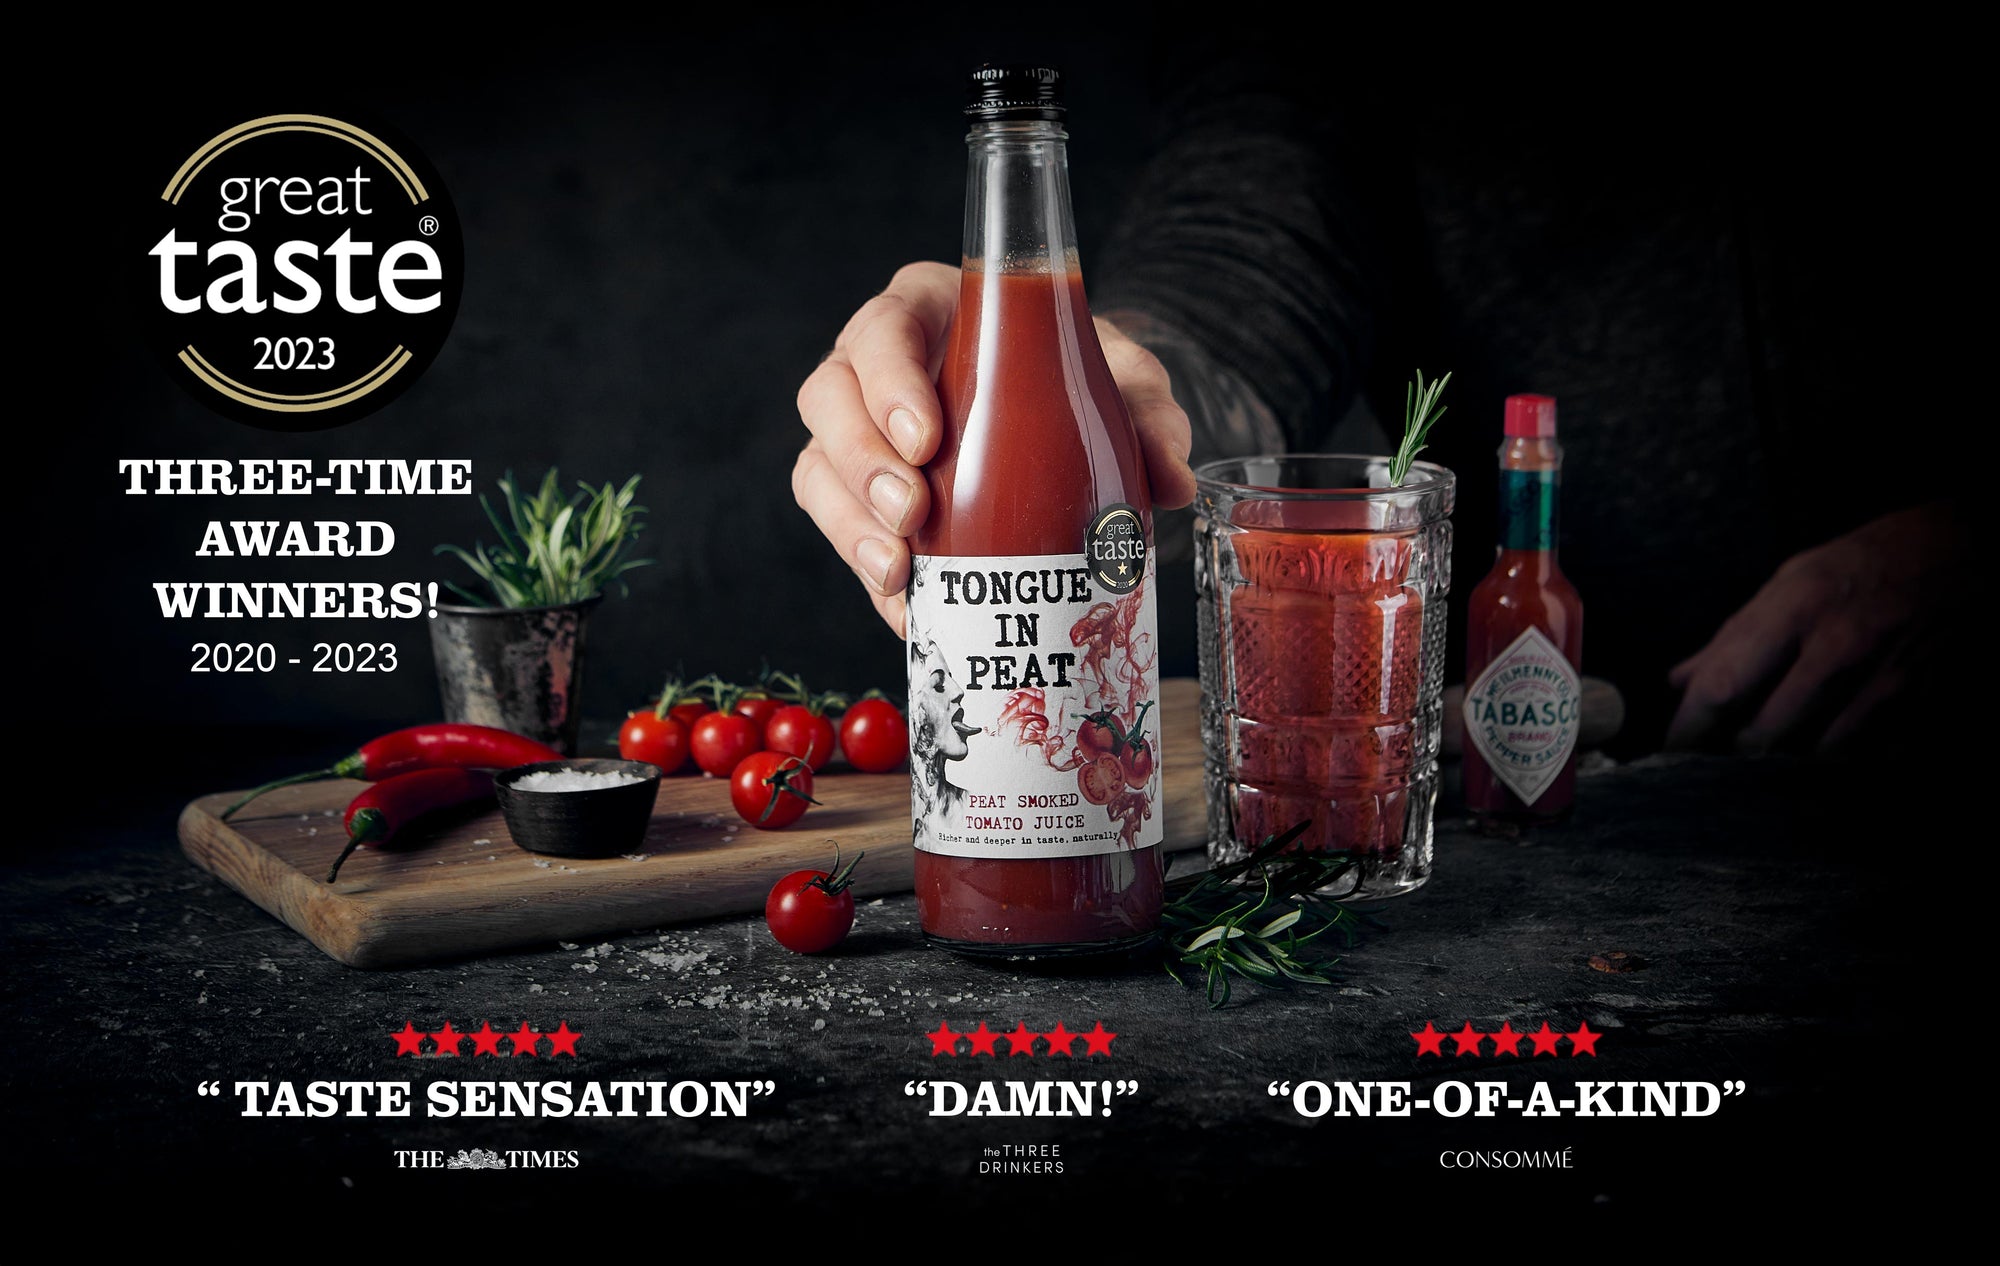 A banner of a person showing off a bottle of Tongue in Peat smoked tomato juice with cherry tomatoes and chilli and tabasco around it with stickers and reviews